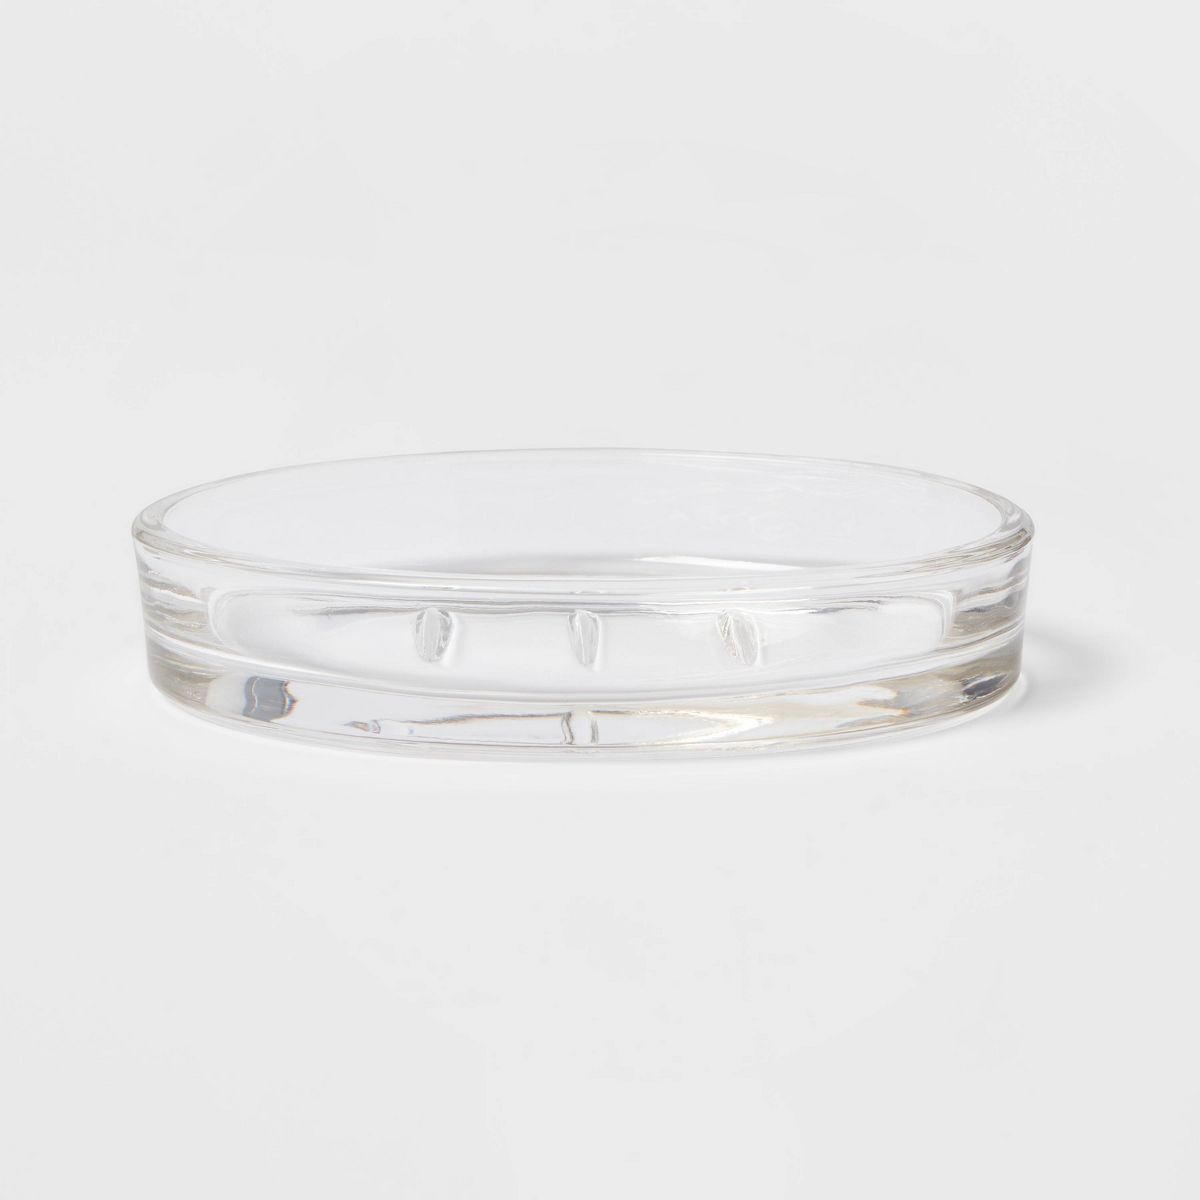 Oil Can Soap Dish Clear - Threshold™ | Target